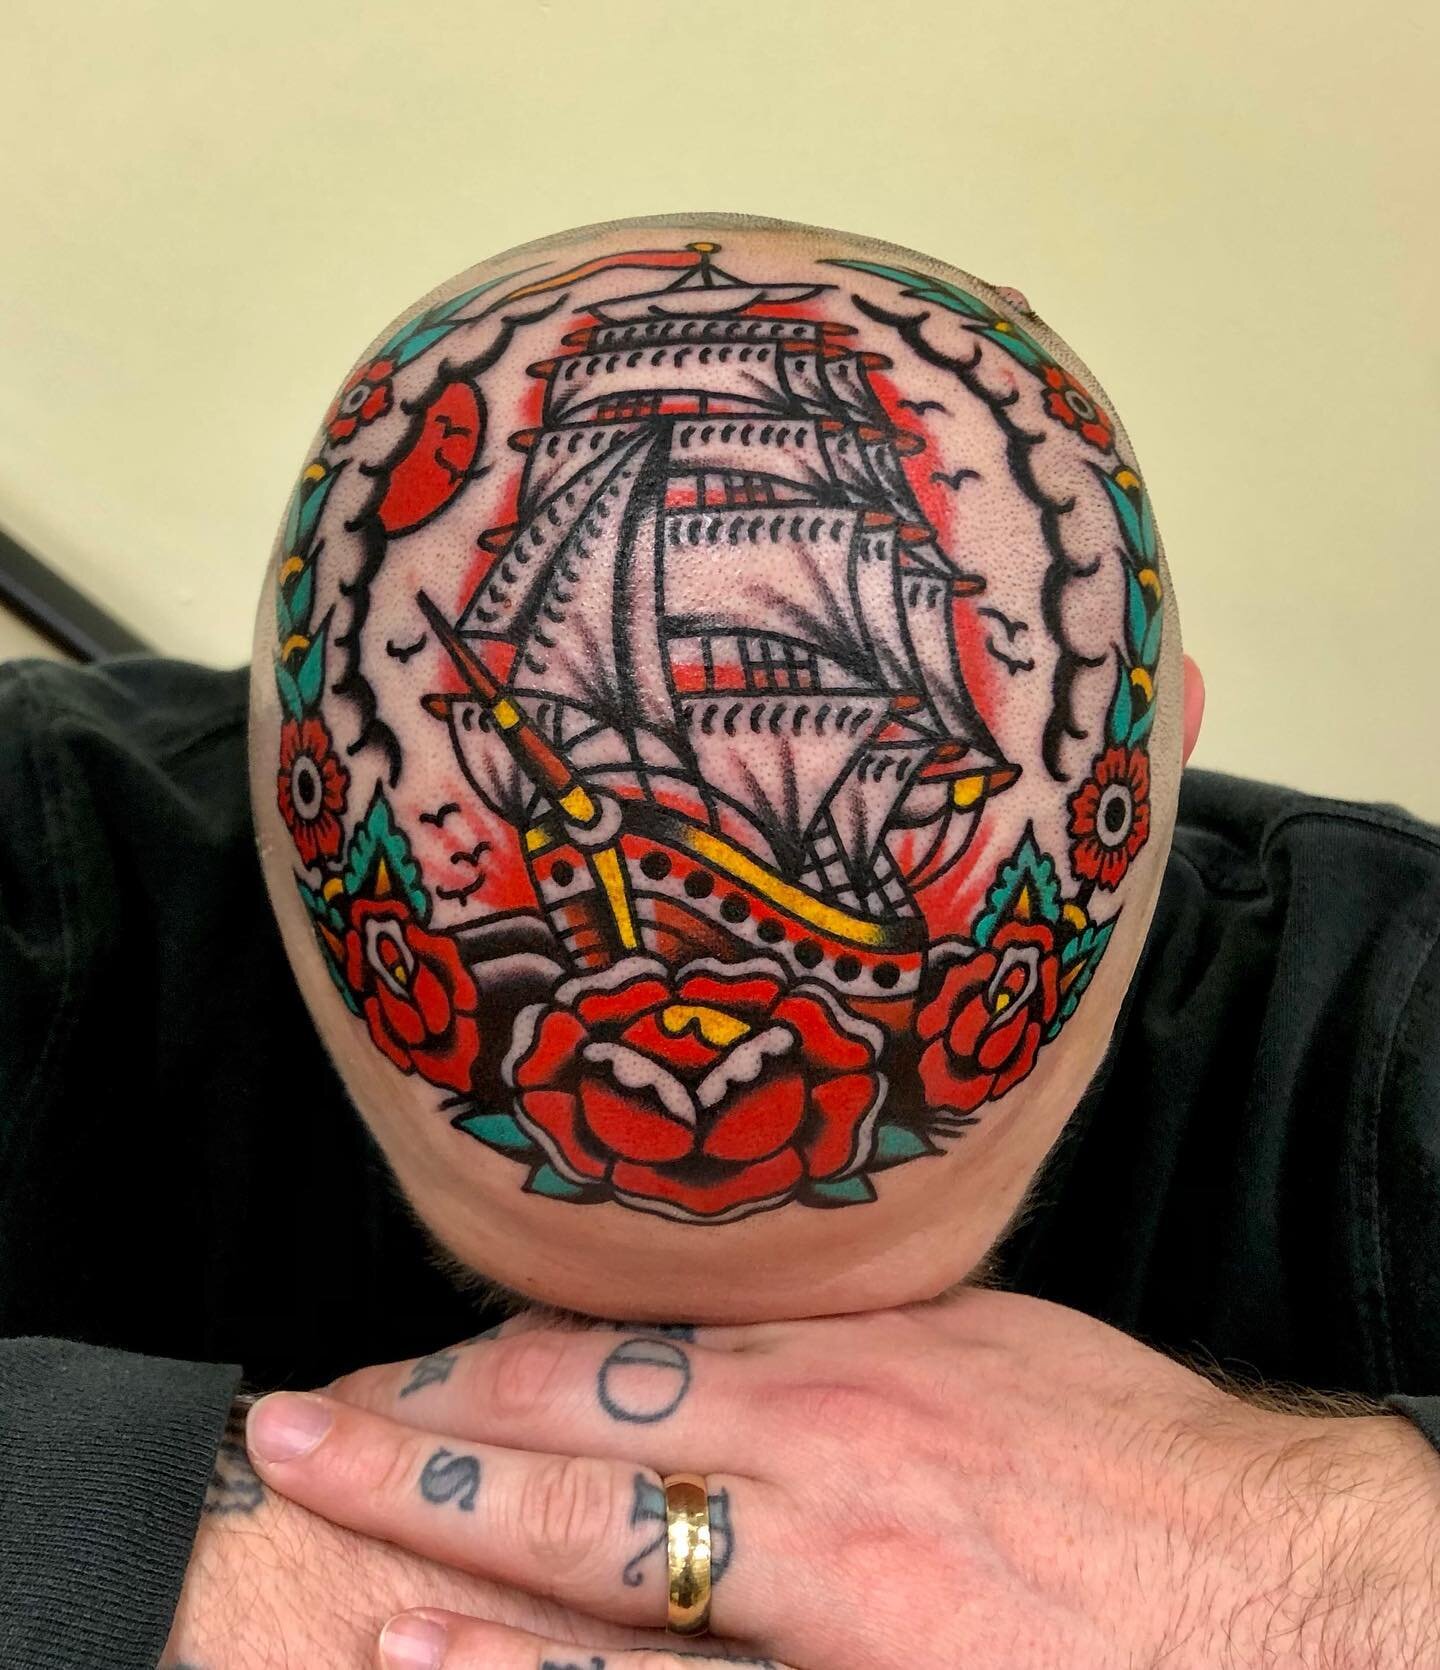 Clipper ship head topper. I gotta shout out @ayersintheair for sitting like a rock through this whole thing and doing it in one shot which is so ridiculously impressive. So stoked with how it came out. Thanks for looking! #tattoo #tattoos #traditiona